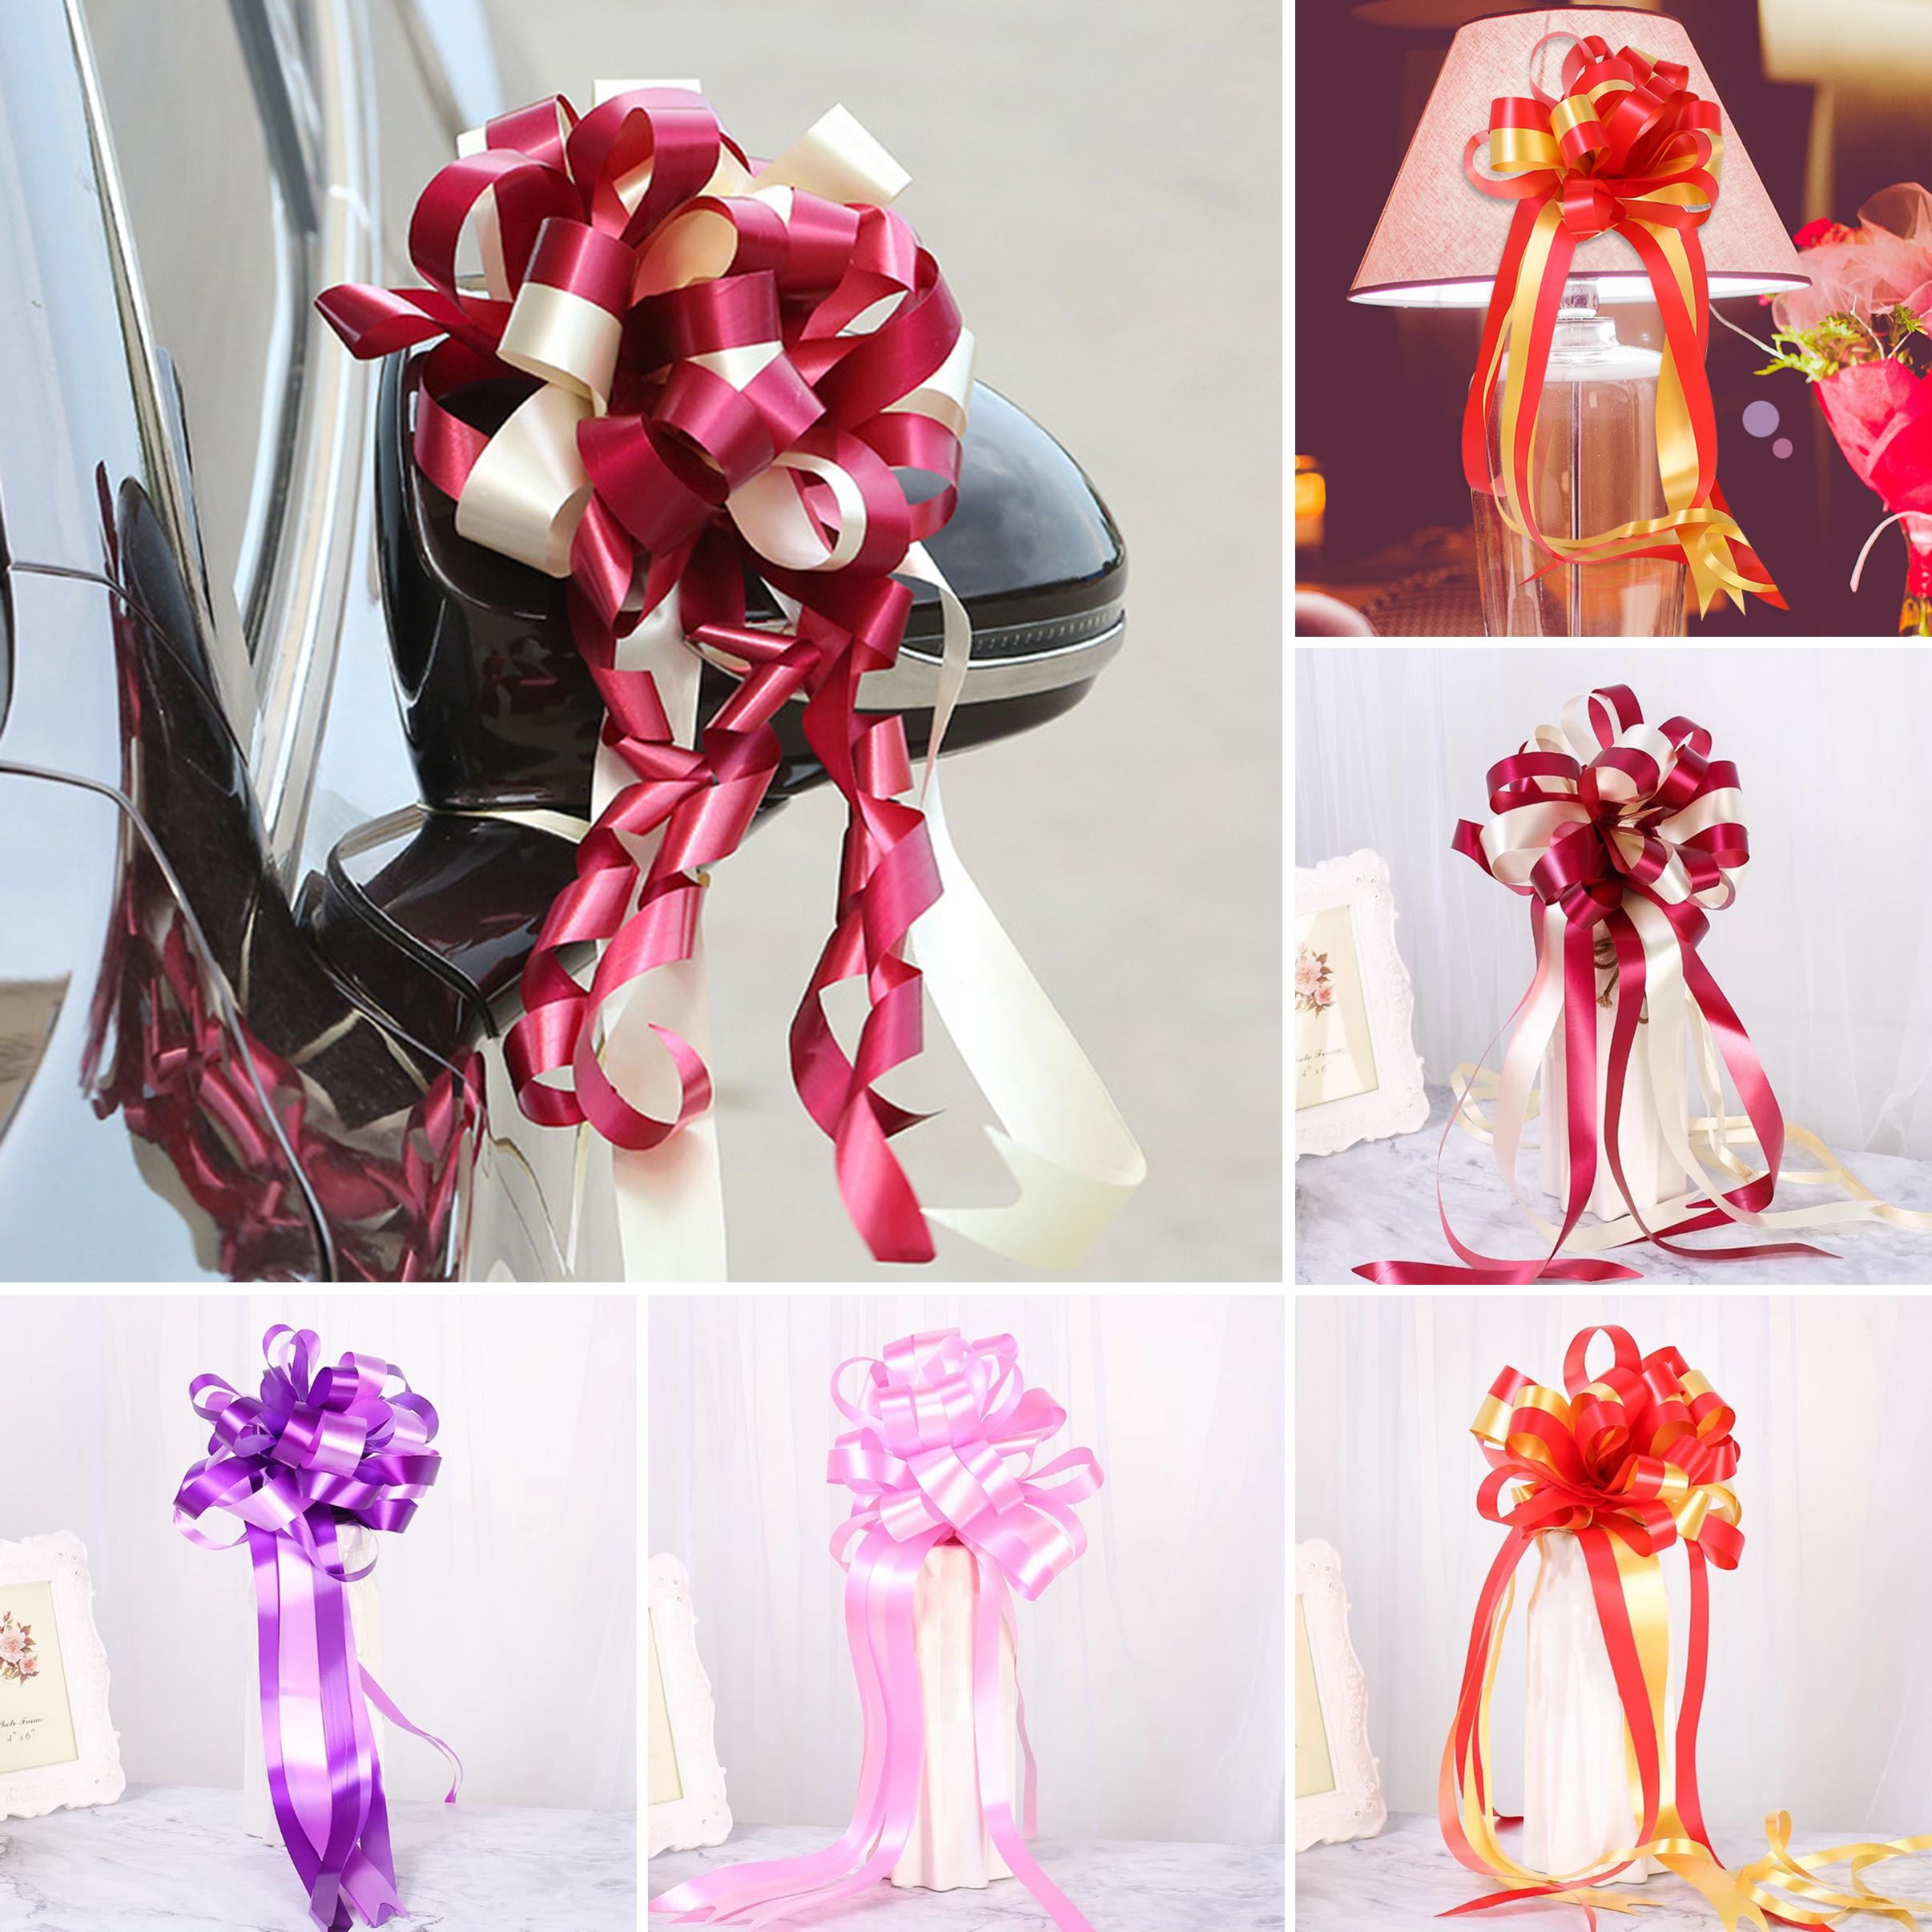  10pcs Ribbon for Bows Gift Wrapping Bow Metallic Bows Presents  Bows Ribbon for Hair Bows Ribbon for Wreaths Ribbon Bows Pink Flower  Garland Ribbon Gift Wrapping Flowers Flash : Health 